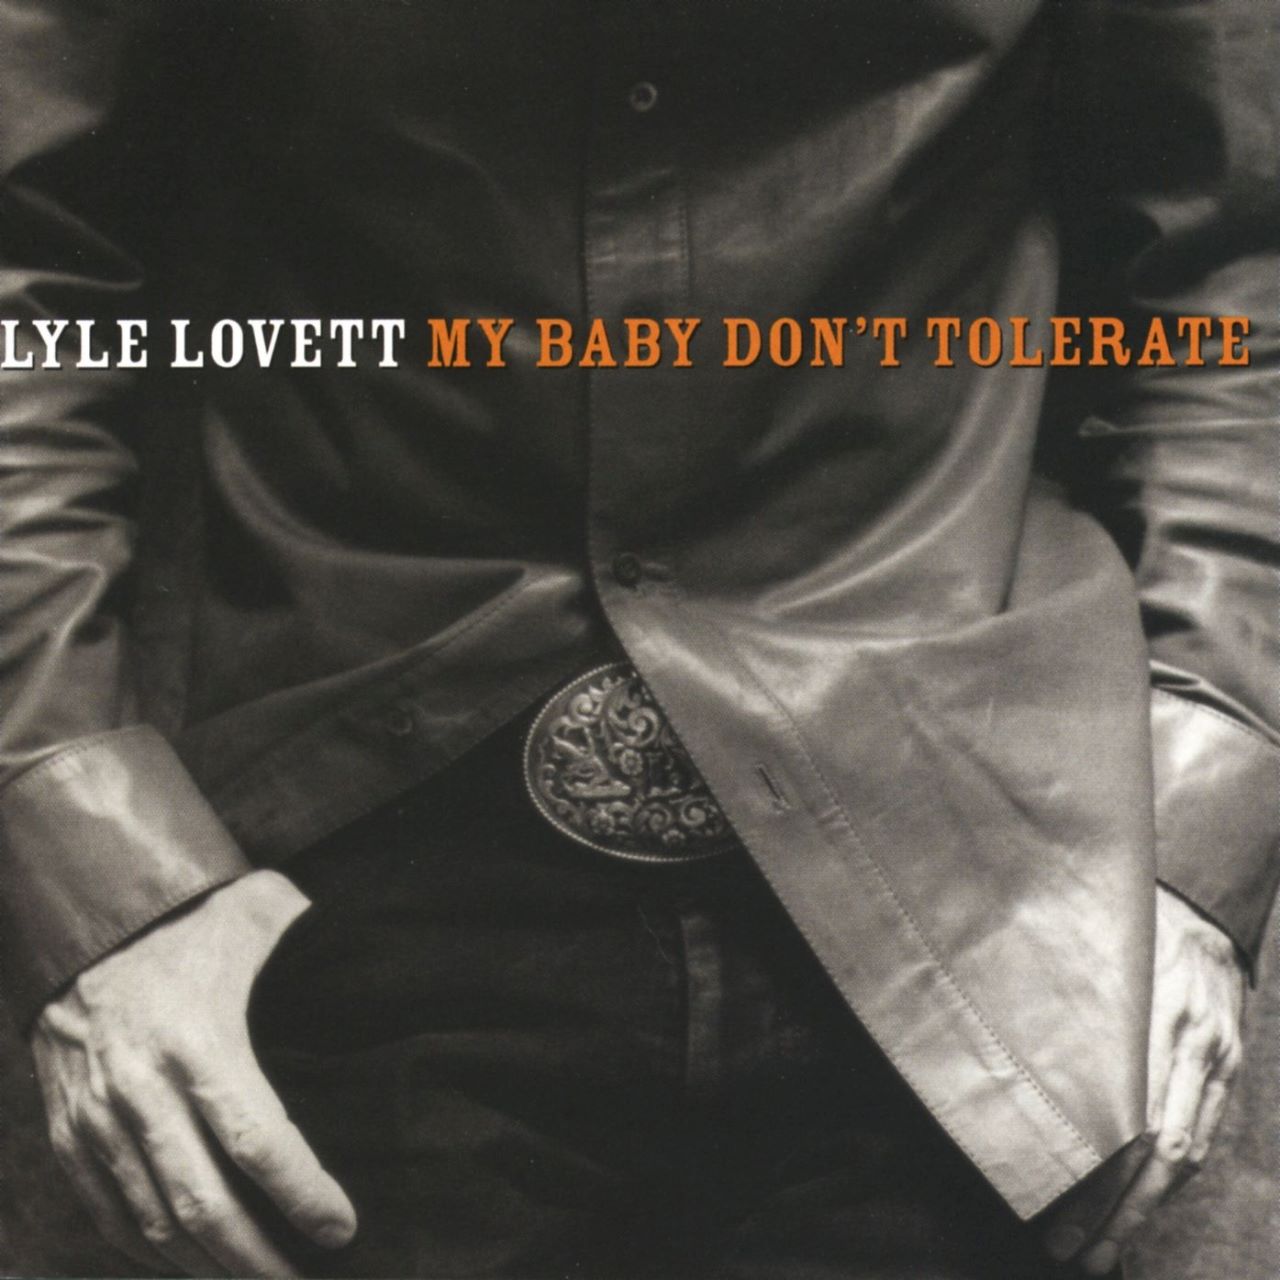 Lyle Lovett - My Baby Don't Tolerate cover album